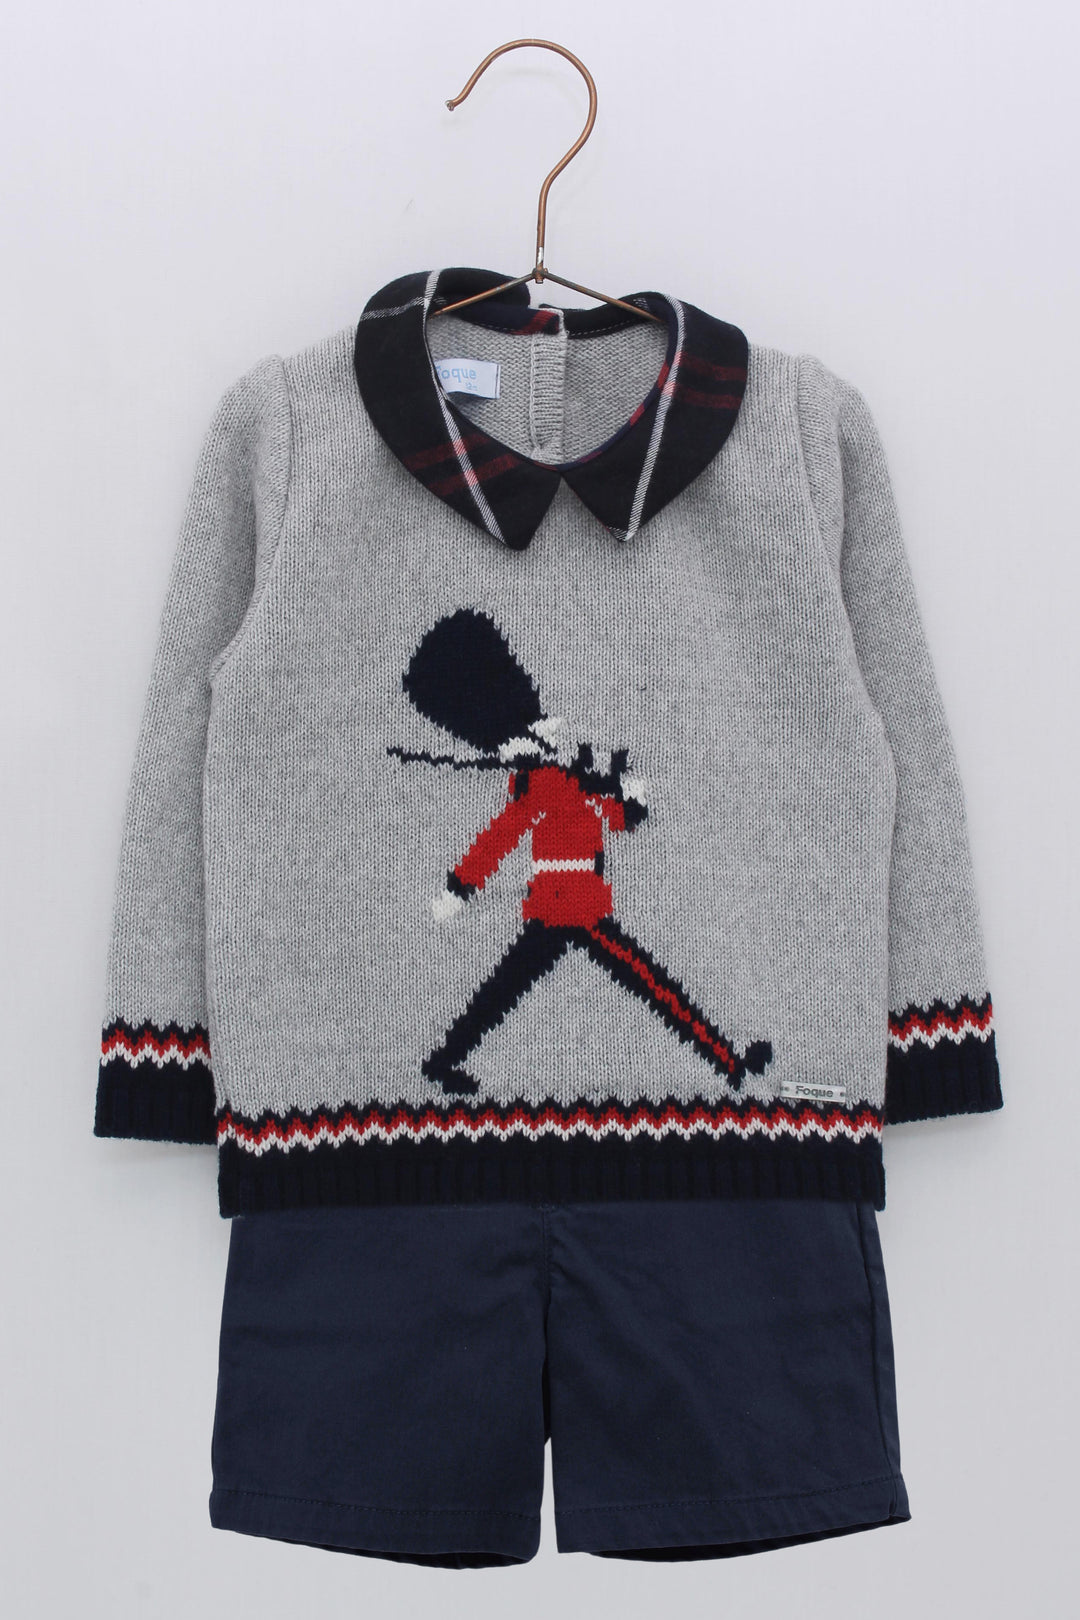 Foque PREORDER "Charlie" Grey Knit Queen's Guard Top & Shorts | Millie and John